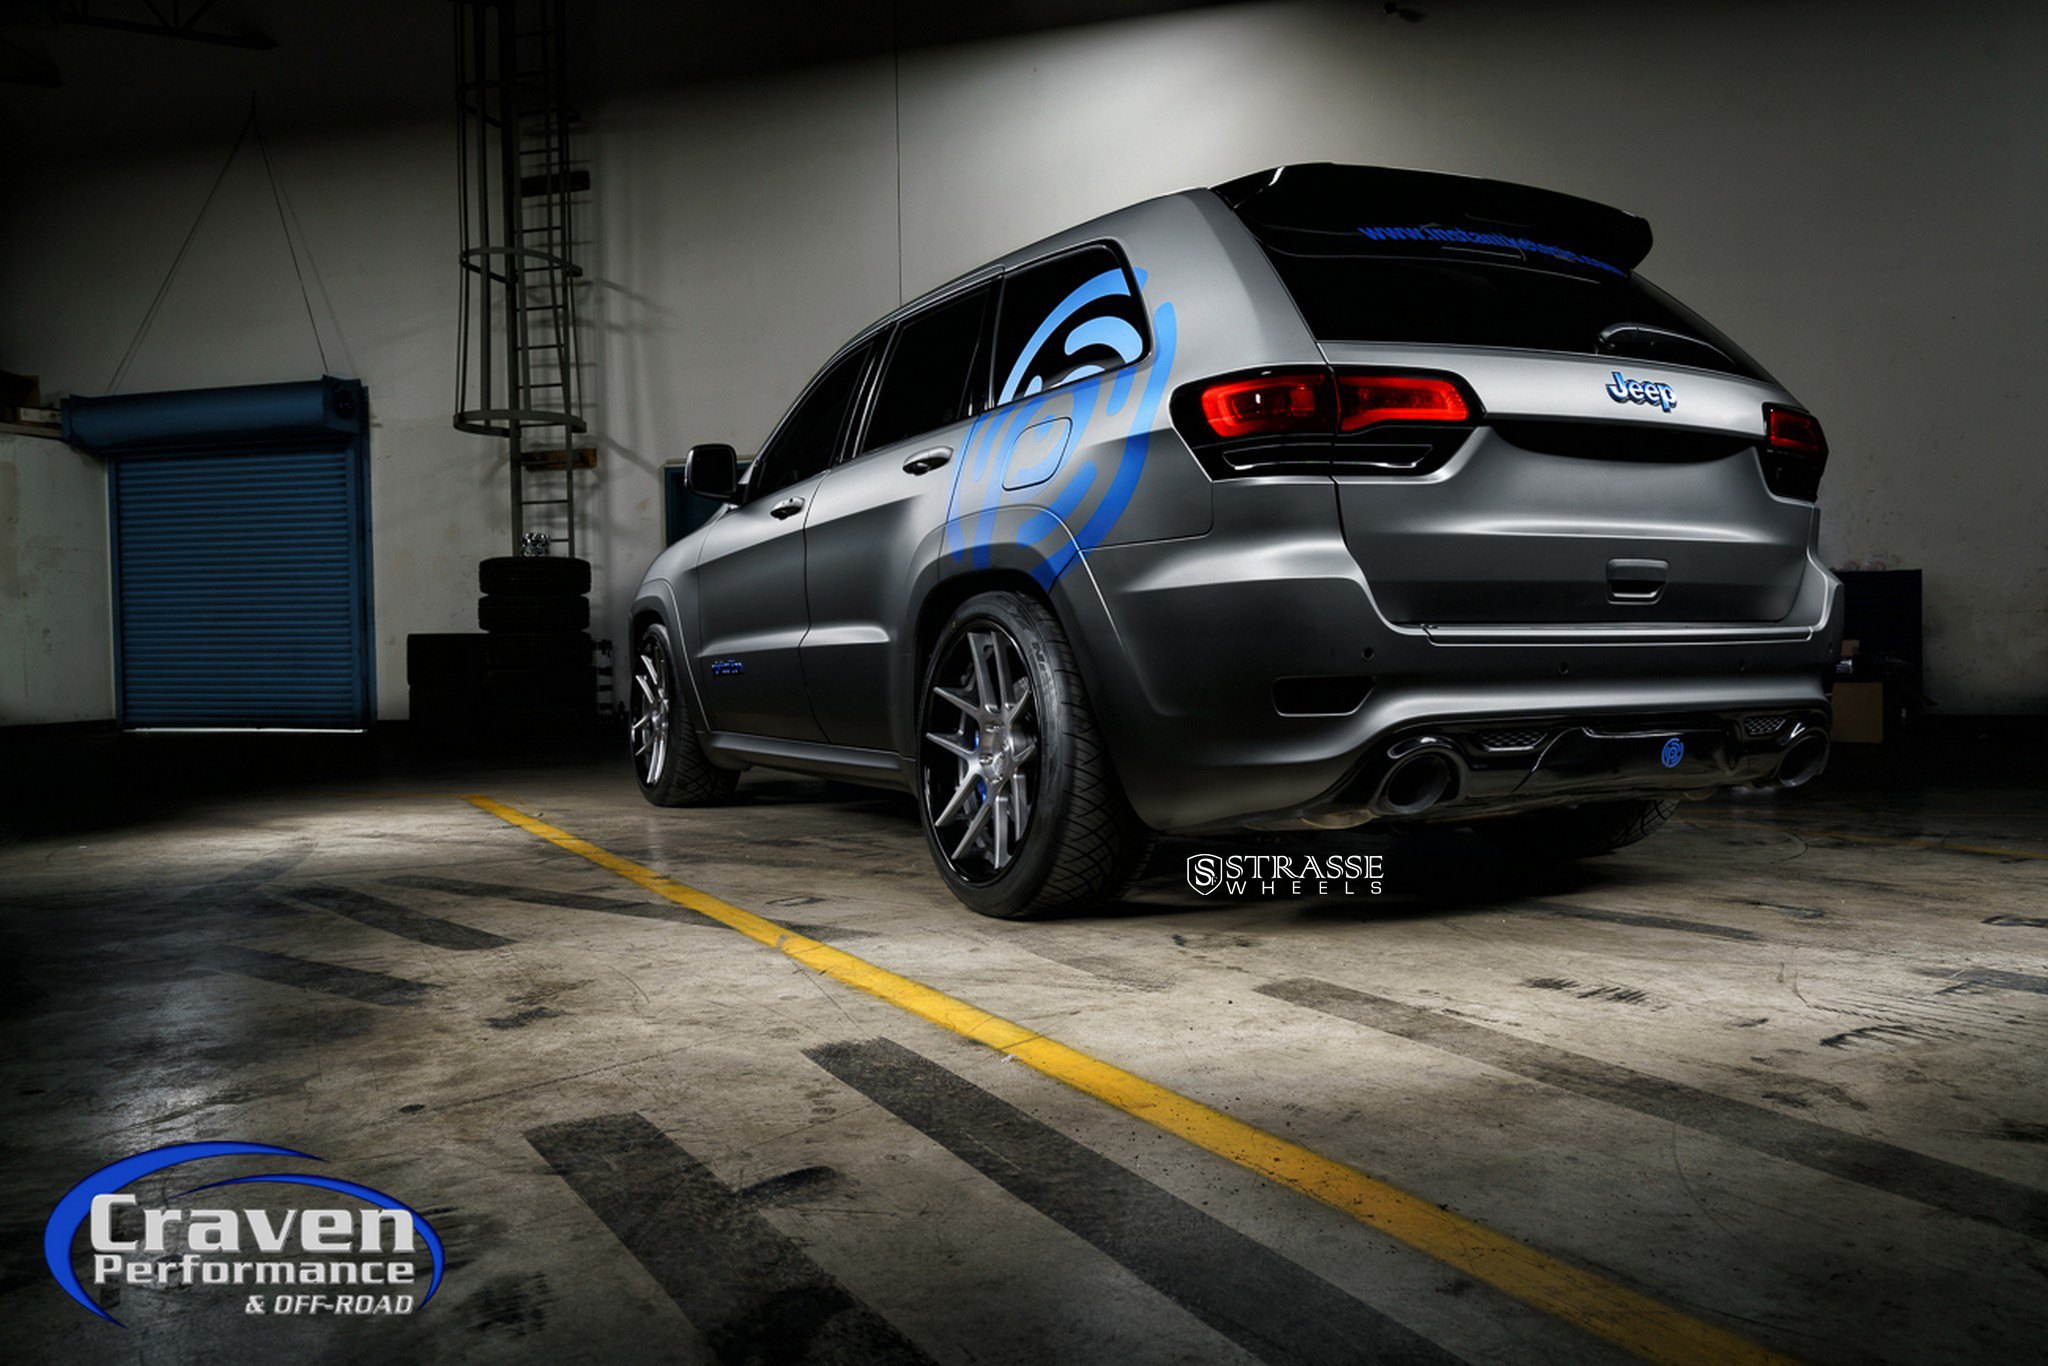 Roofline Spoiler on Gray Matte Jeep Grand Cherokee - Photo by Strasse Forged